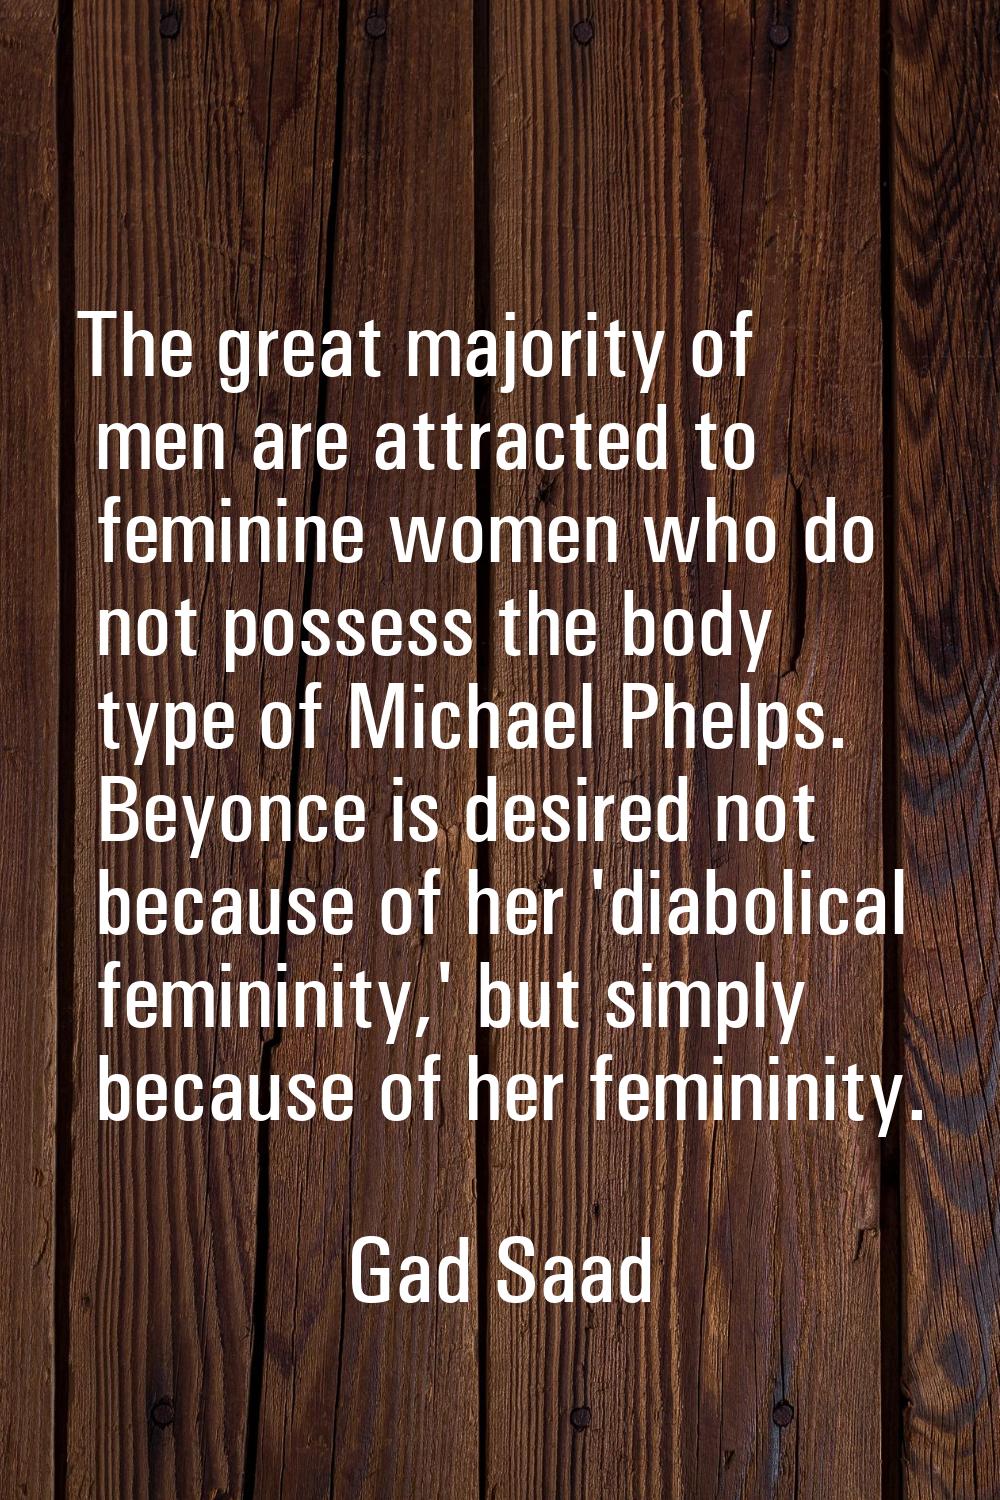 The great majority of men are attracted to feminine women who do not possess the body type of Micha